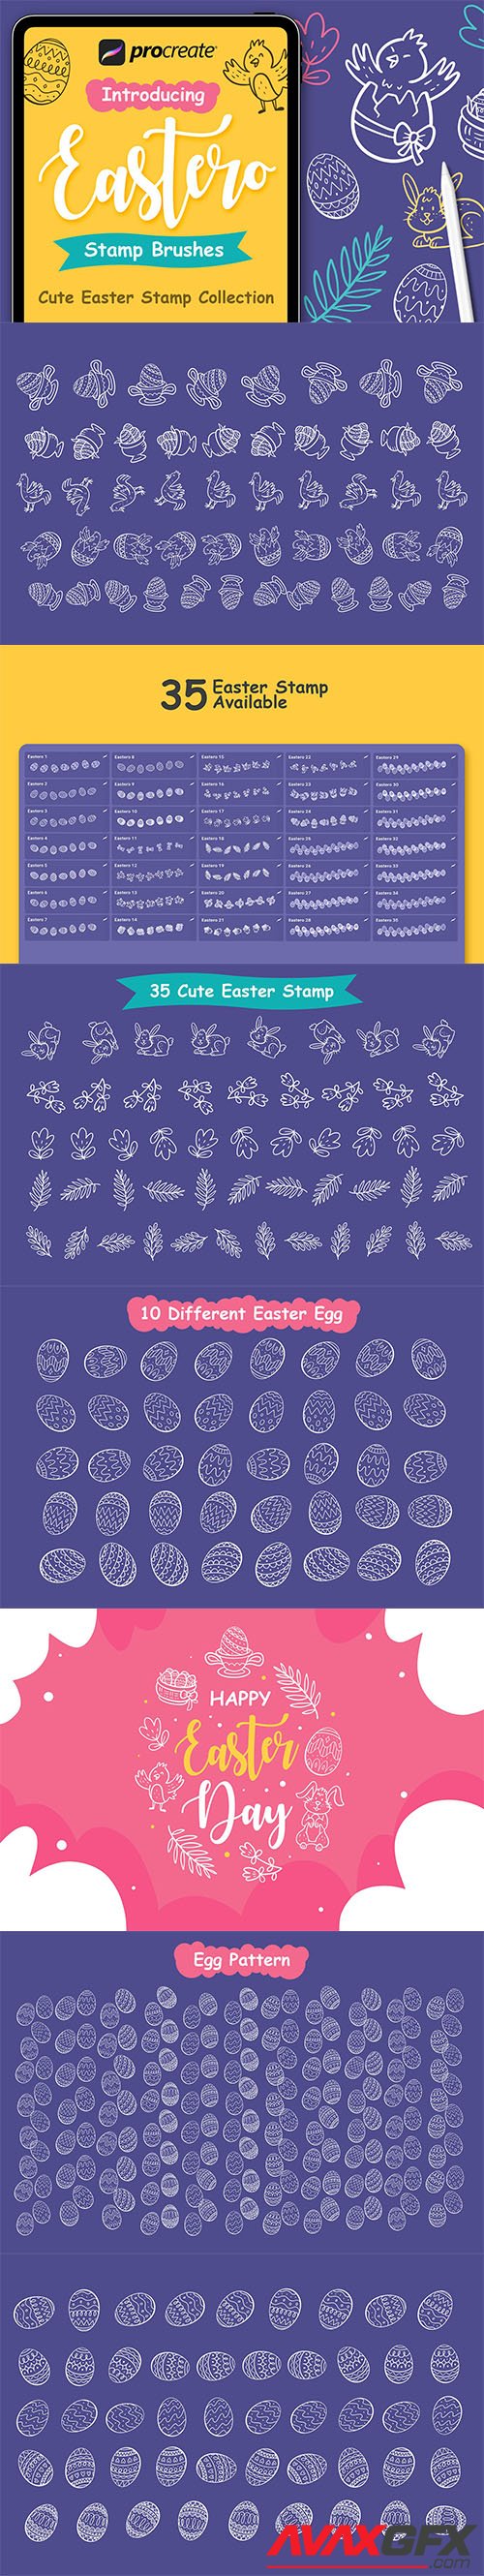 Easter Stamp - Procreate Brushes